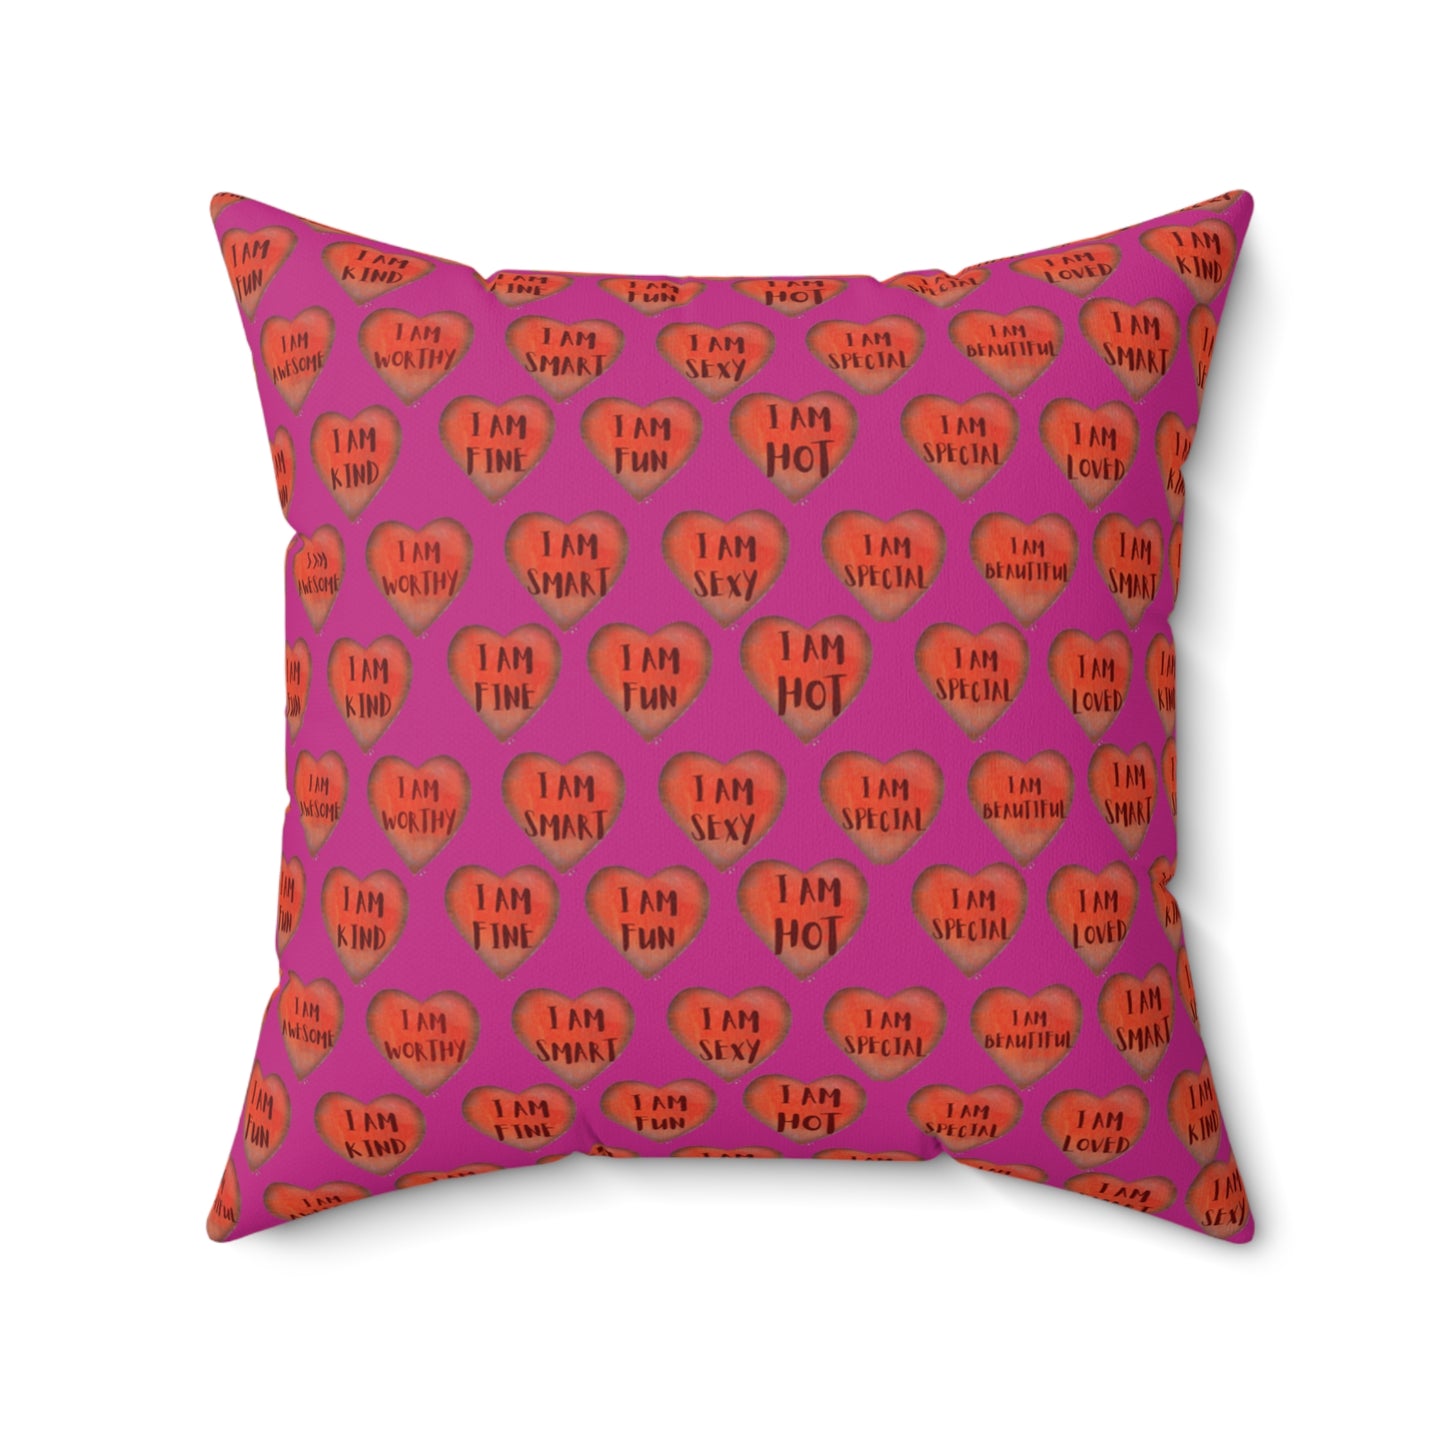 Colorful Faux Suede Pillow - Red Heart motivational pillow - Pink Throw Pillow - Inspirational Decorative pillow